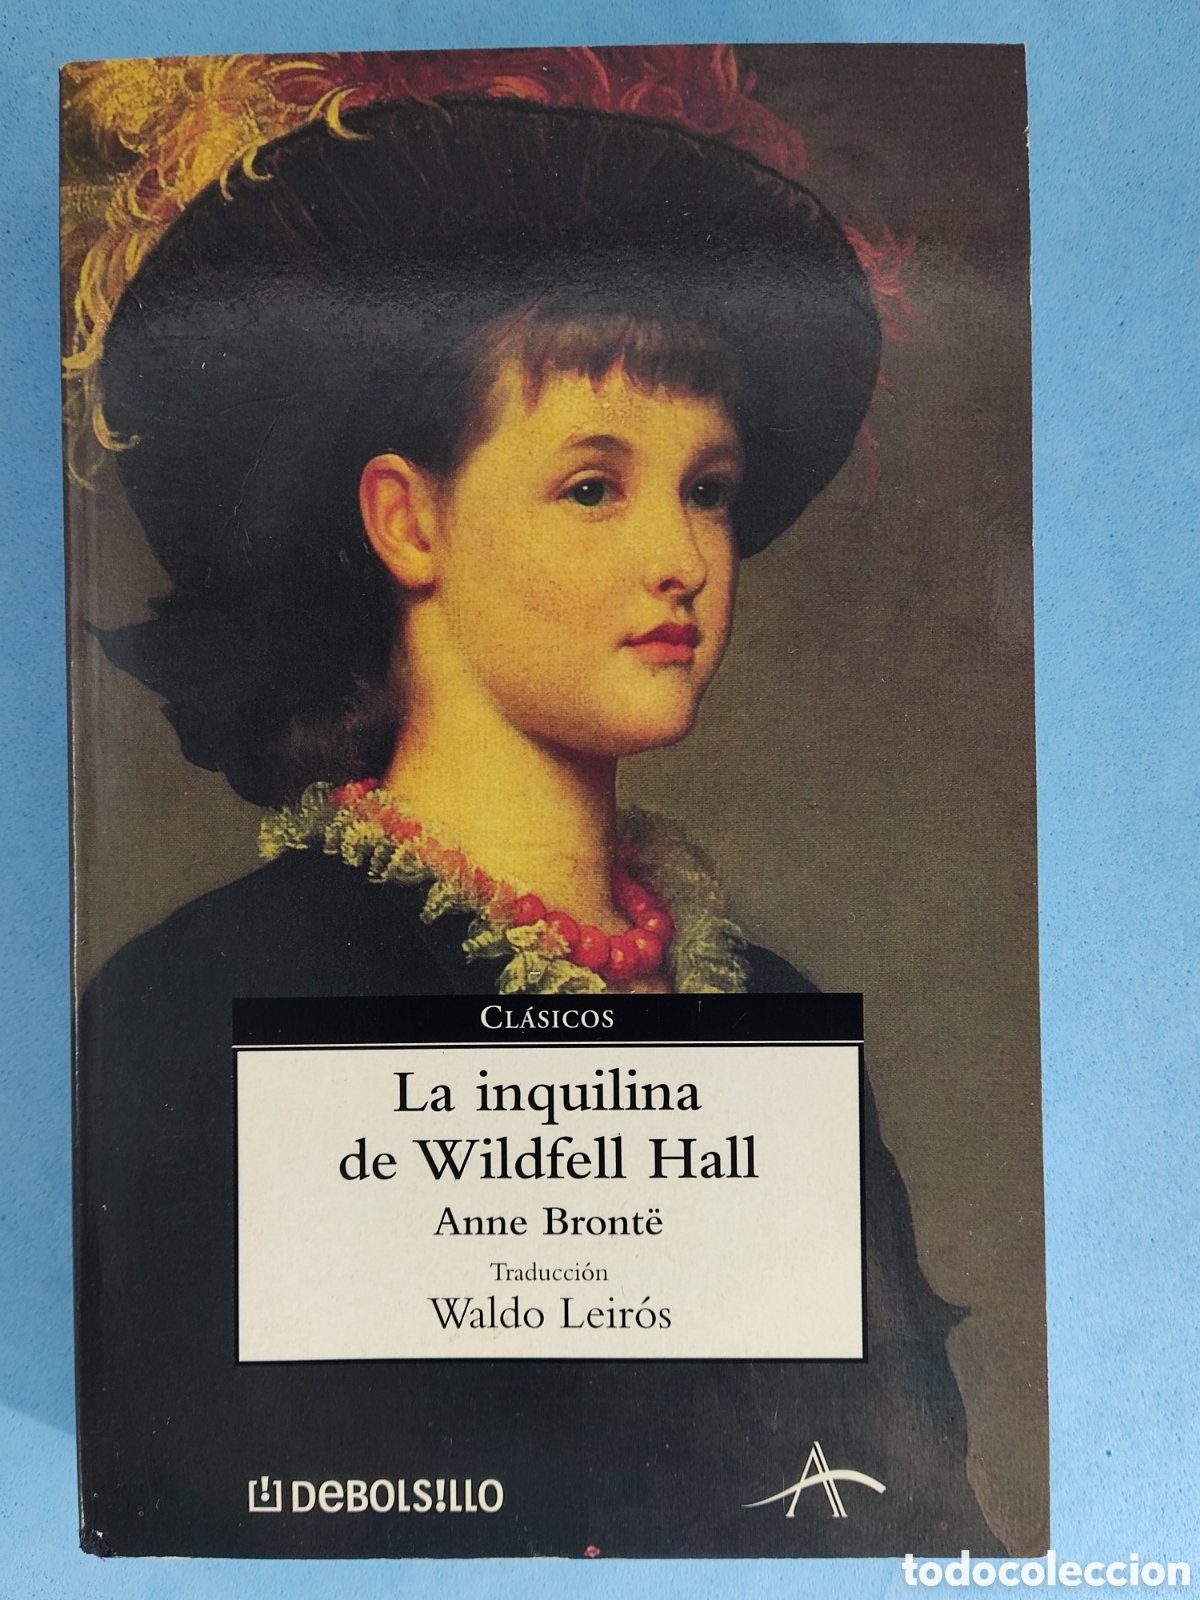 la inquilina de wildfell hall. anne brontë. alb - Buy Other used narrative  books on todocoleccion